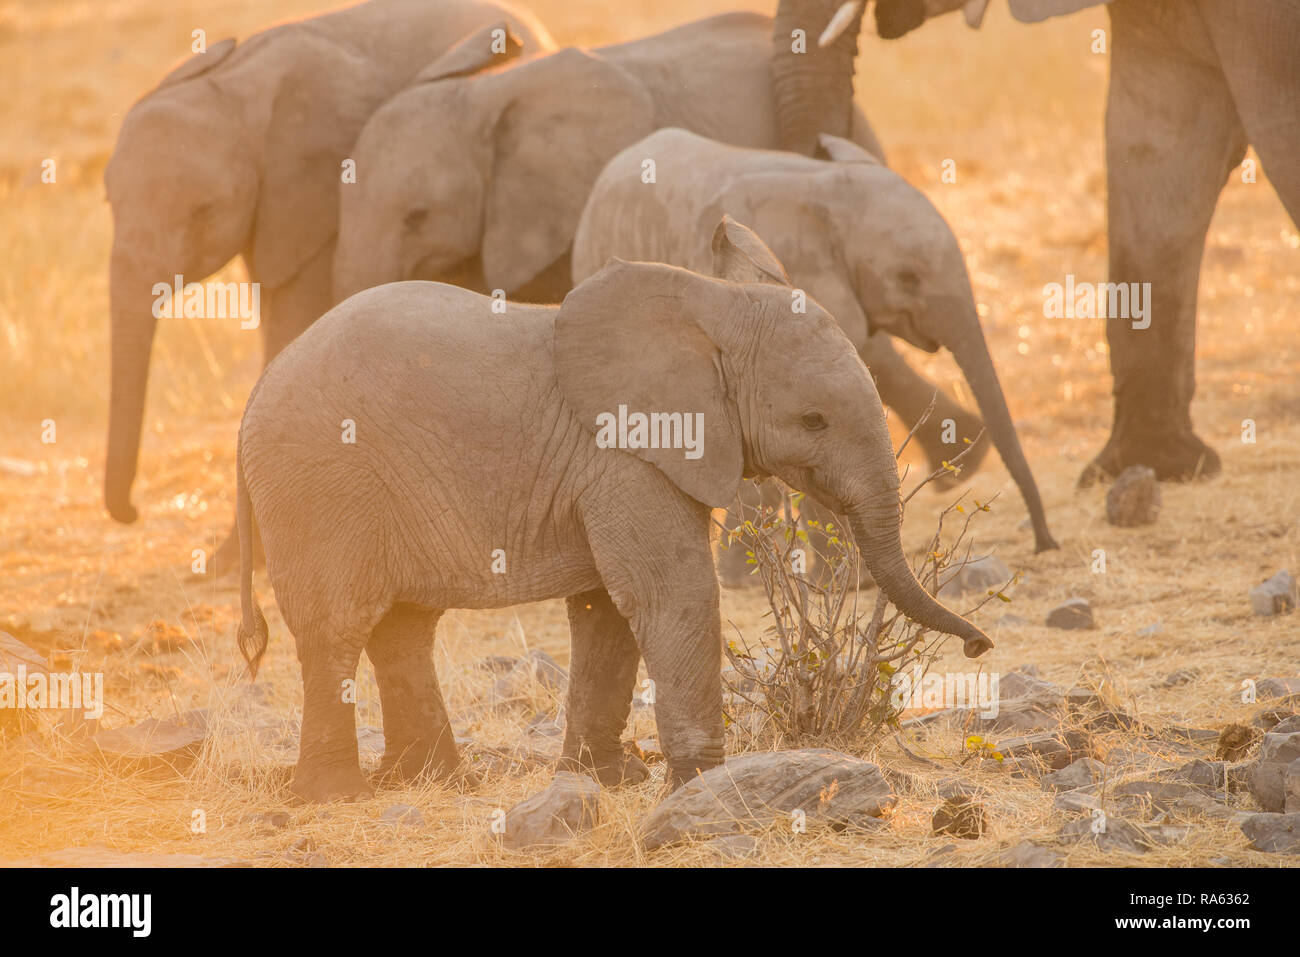 Elephant herd With small cubs Stock Photo